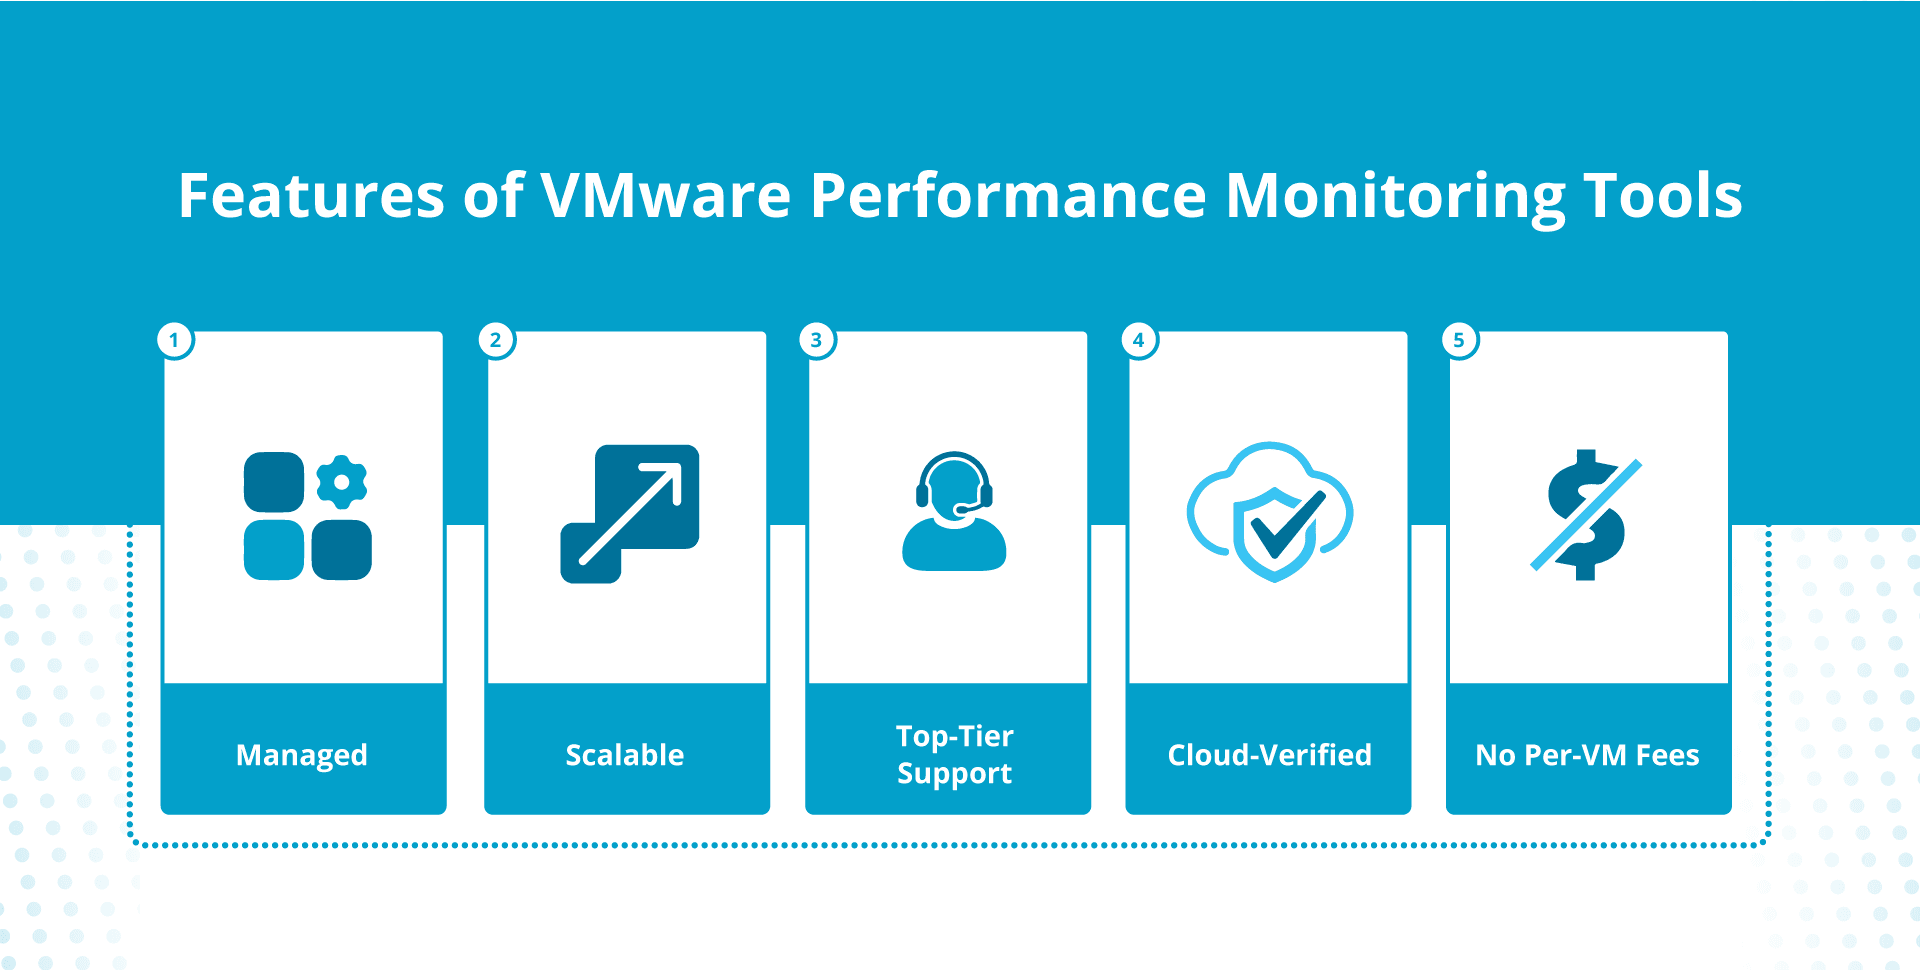 VMware performance monitoring tools are feature-rich.